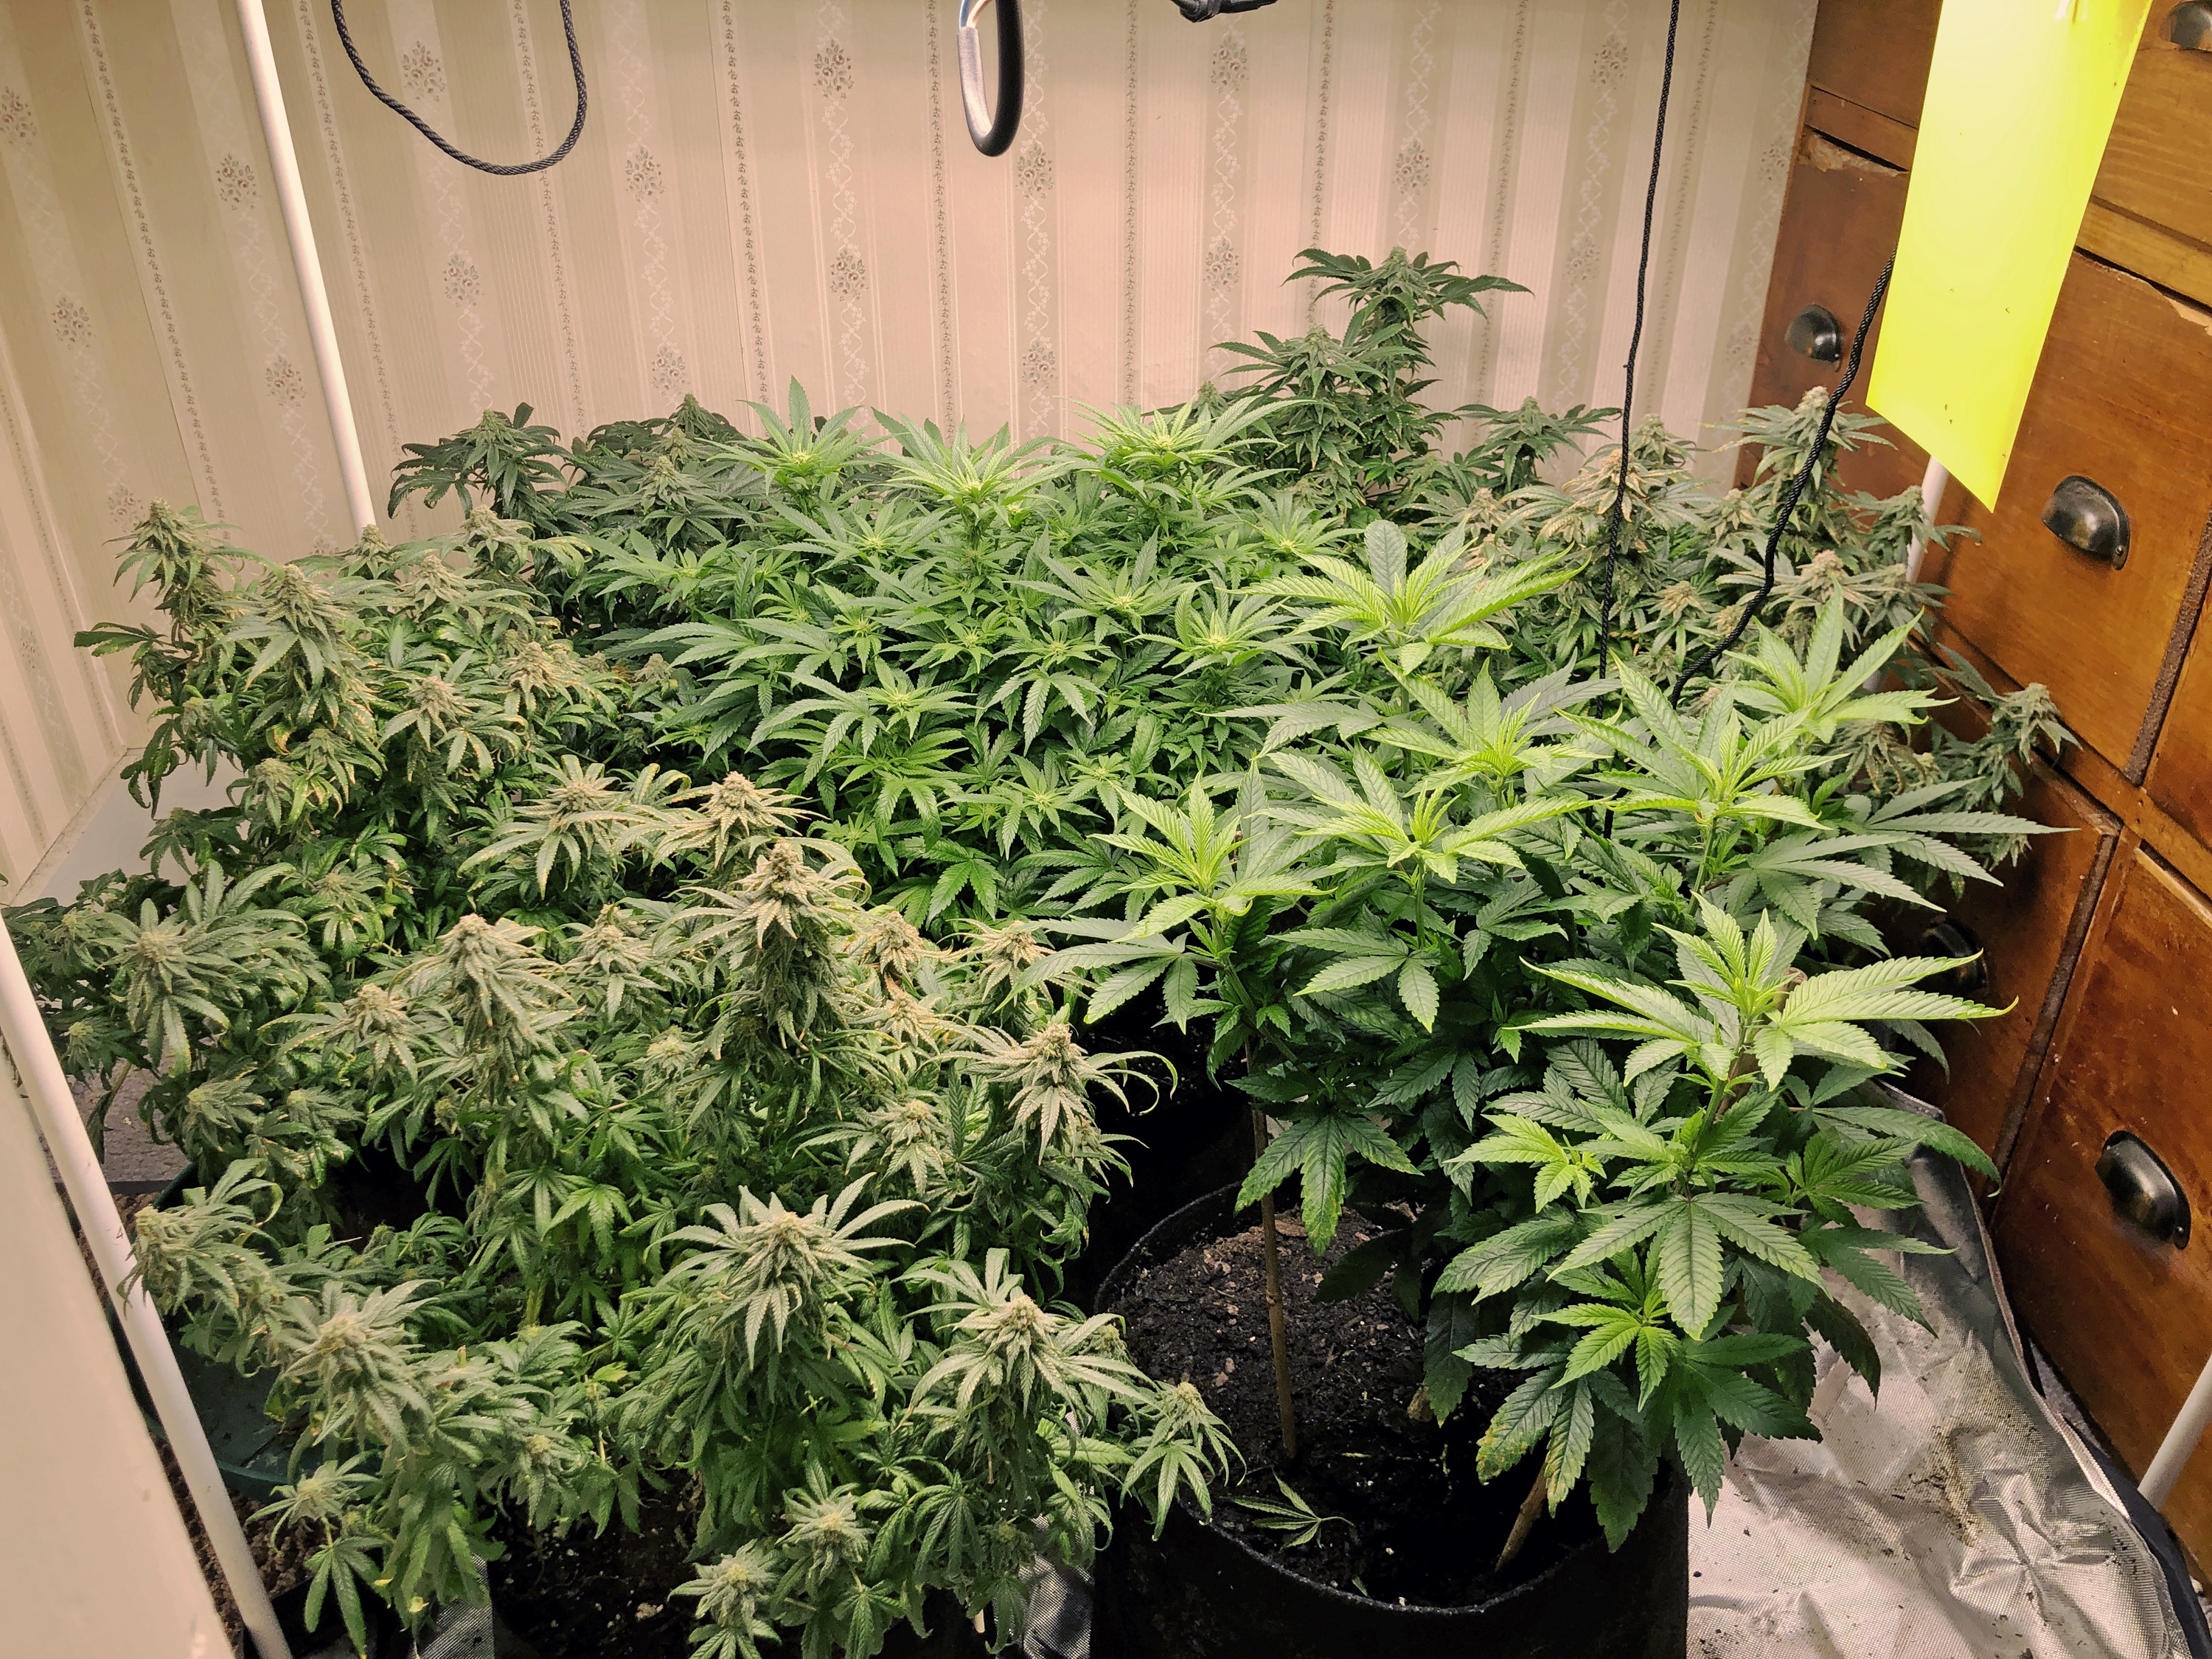 Indoor cannabis plants at various growth stages in a home setup